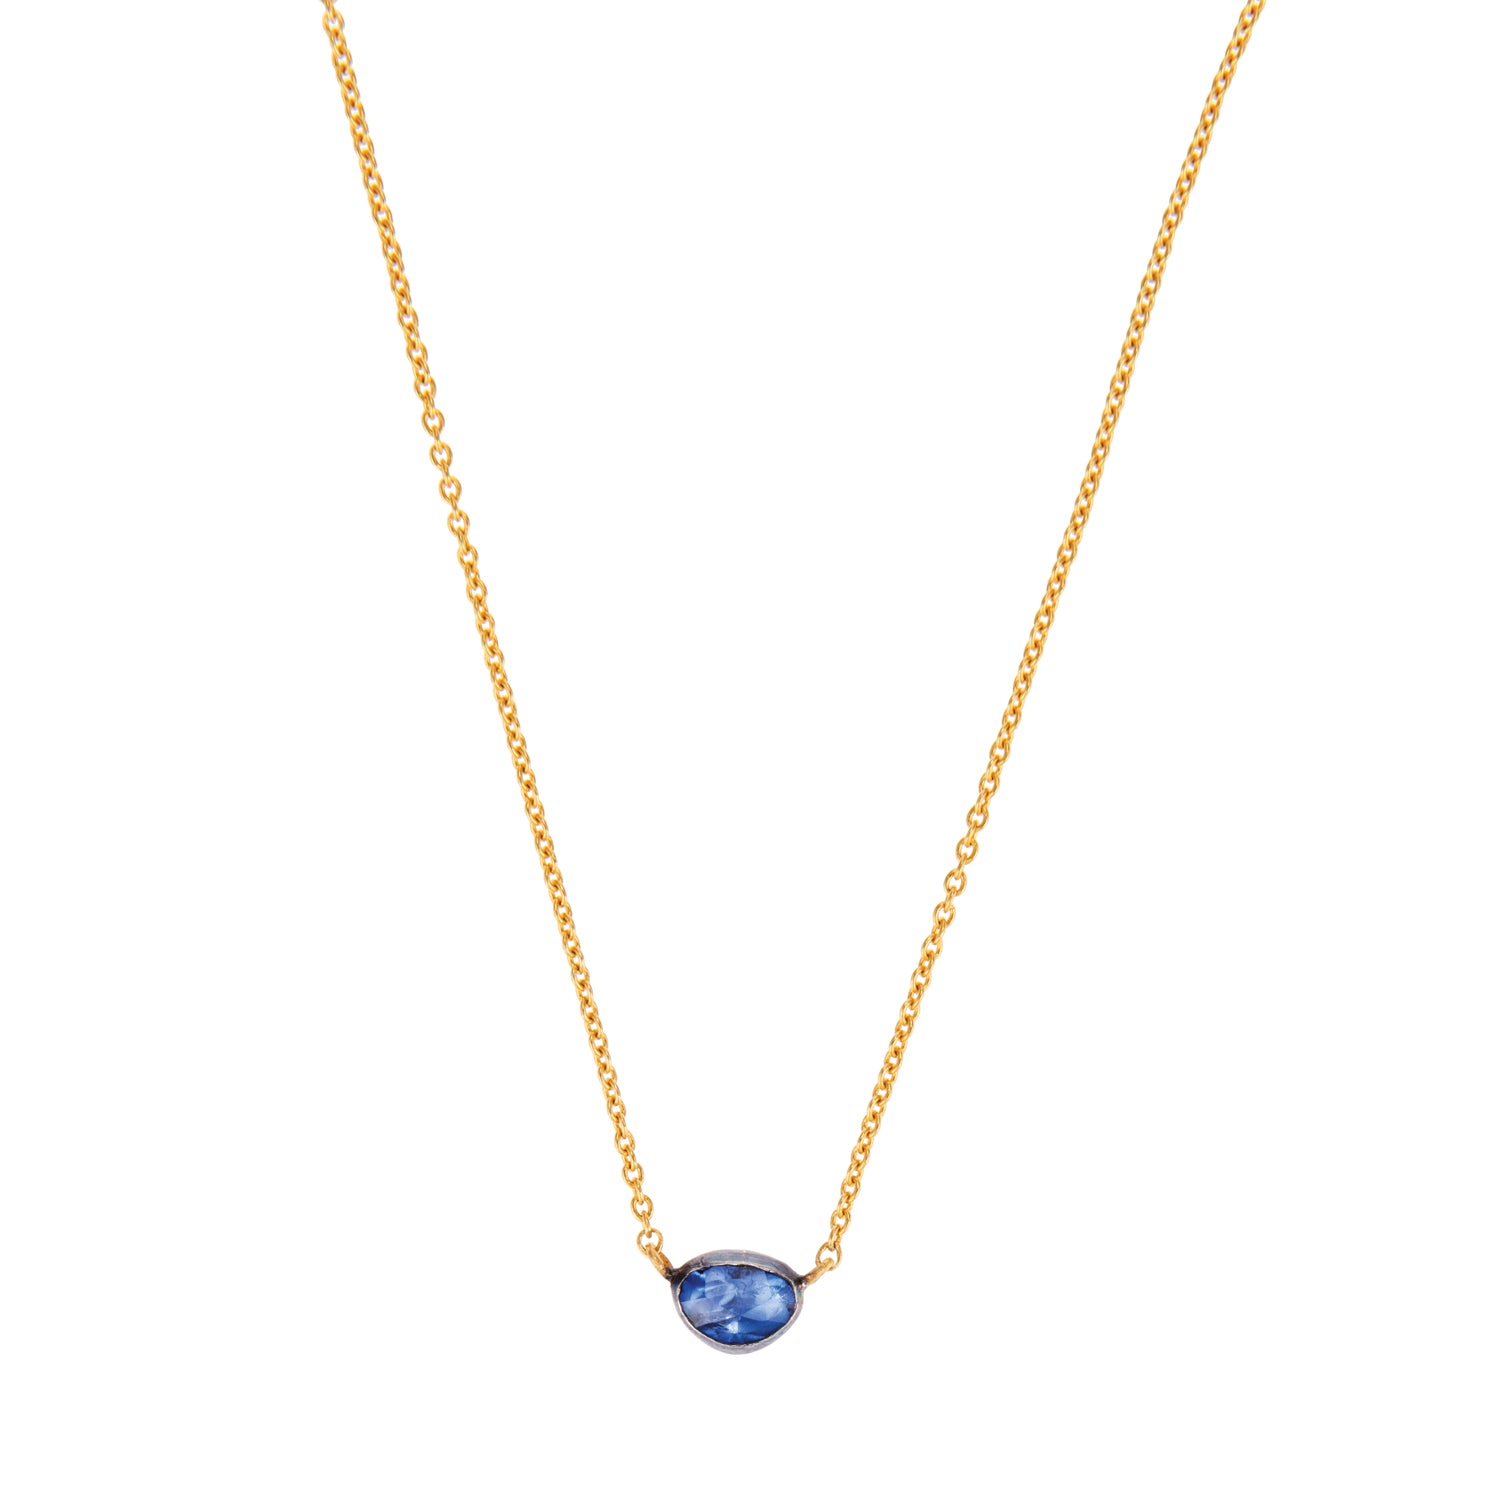 Sapphire Solitaire Necklace, Made with A Single Natural Blue Sapphire Set in 4 Prongs 18K Gold Necklace, Dainty Sapphire Set 18 K Rose Gold